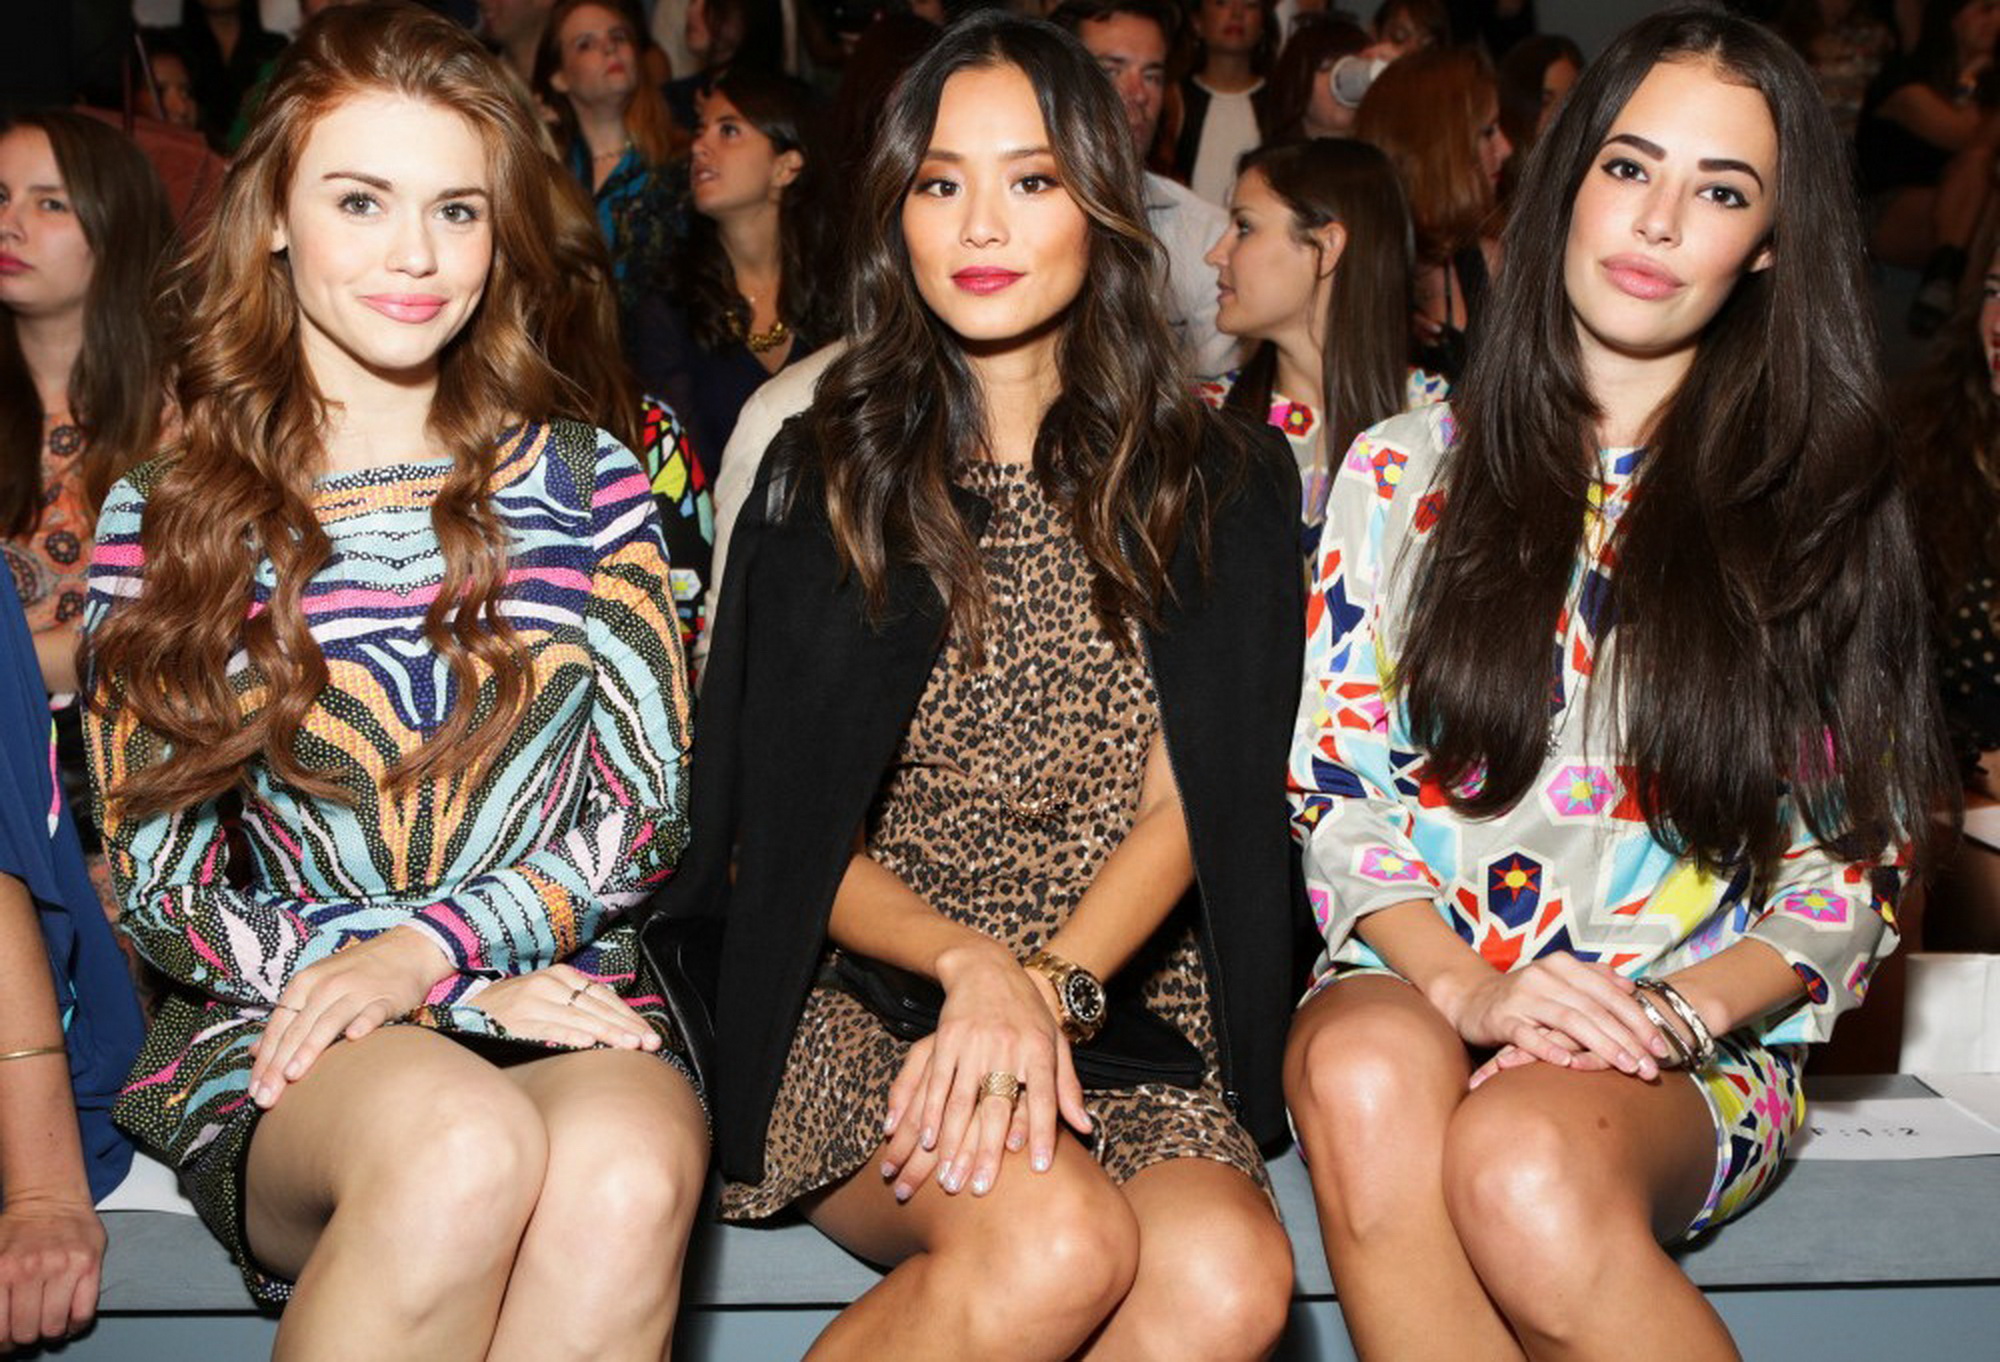 Holland-Roden-Upskirt-No-Panties-Pictures-At-Mara-Hoffman-Fashion-Show-In-NY-09.jpg